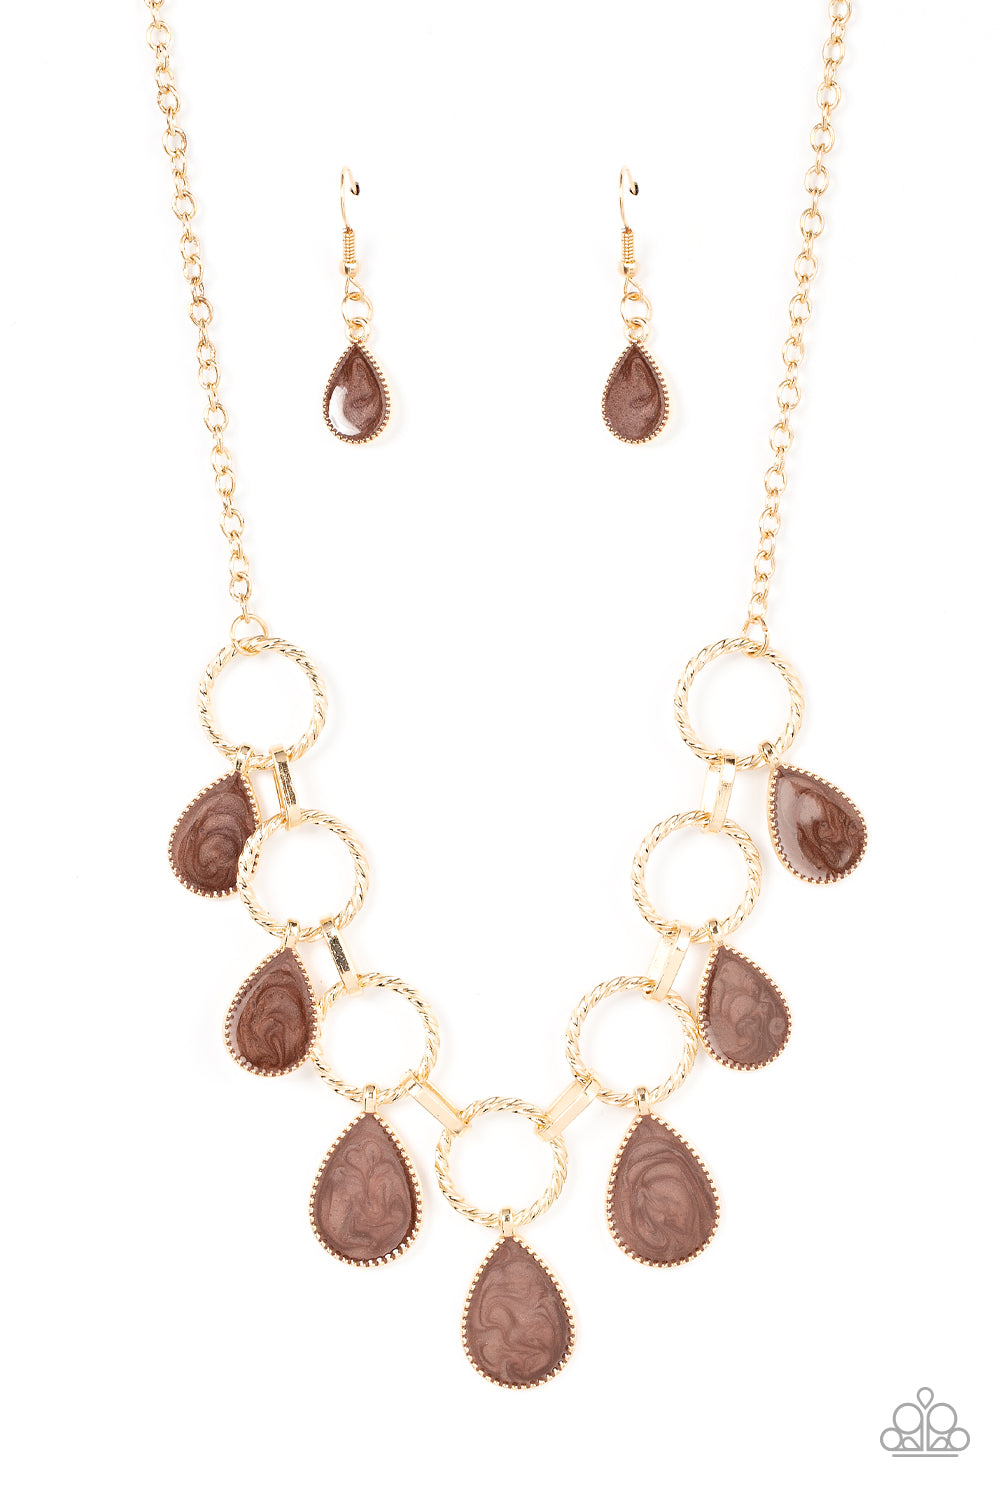 Golden Glimmer - Brown Necklace - Paparazzi Accessories - Swirling with brown glazed finishes, textured gold teardrops swing from the bottoms of spun gold hoops that link with pinched gold fittings below the collar, resulting in a refined fringe below the collar.